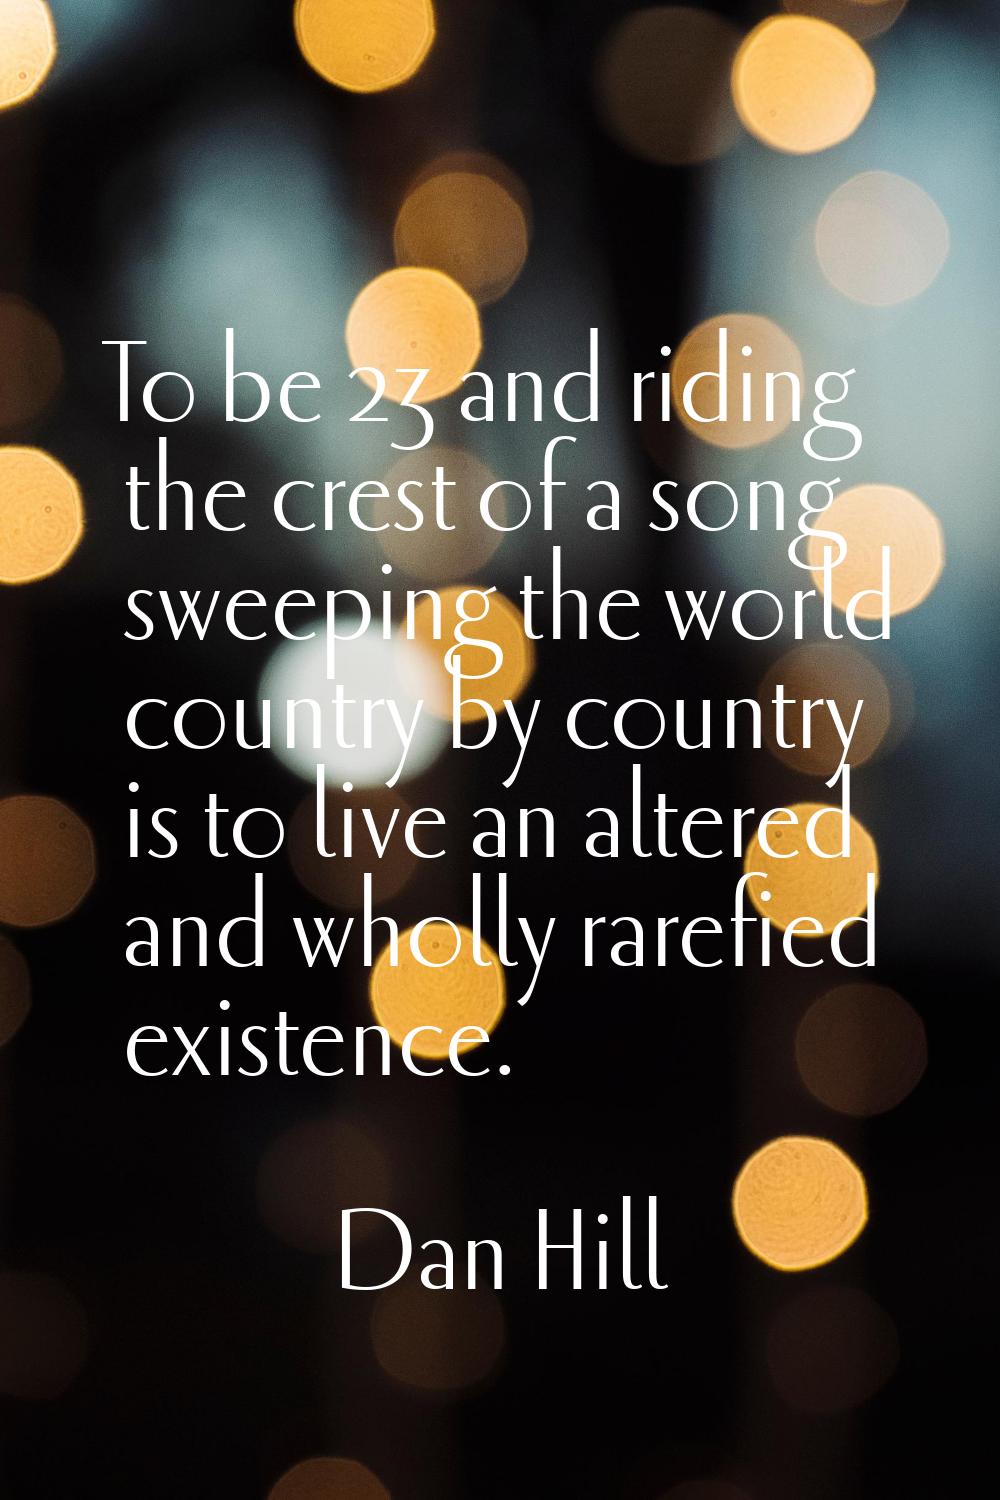 To be 23 and riding the crest of a song sweeping the world country by country is to live an altered